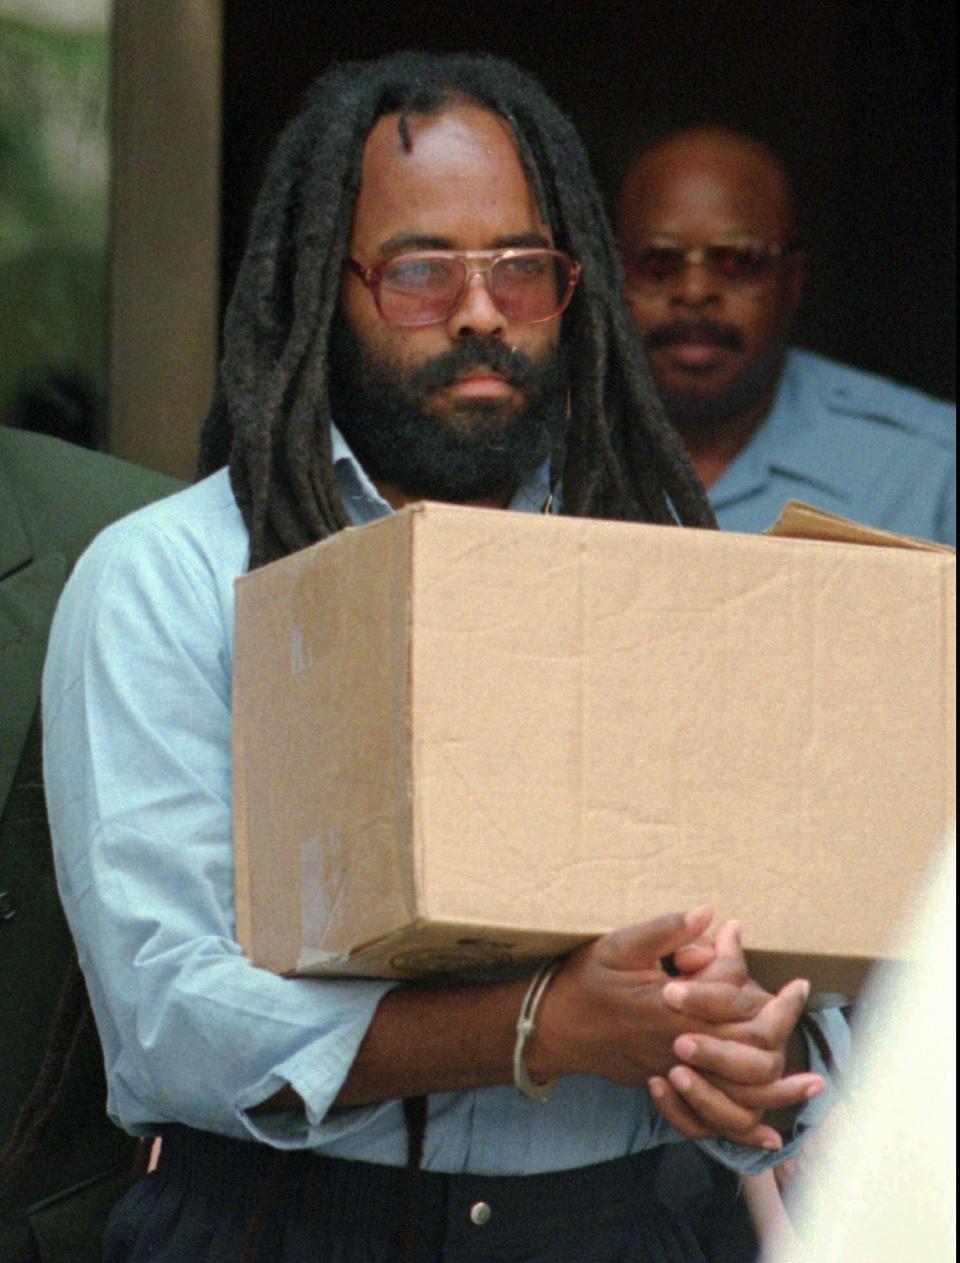 FILE - In this July 12, 1995 file photo, Mumia Abu-Jamal leaves Philadelphia's City Hall after a hearing. Philadelphia is poised to revisit one of its most contentious murders as prison activist Mumia Abu-Jamal fights for another day in court in a 1981 police slaying. Police widow Maureen Faulkner fears she will never find closure in the criminal justice system after nearly 40 years. She filed a petition Thursday, Sept. 19, 2019 to get Philadelphia District Attorney Larry Krasner’s office recused from the case after Krasner failed to oppose Abu-Jamal’s bid for a new court hearing.(AP Photo/Chris Gardner, File)